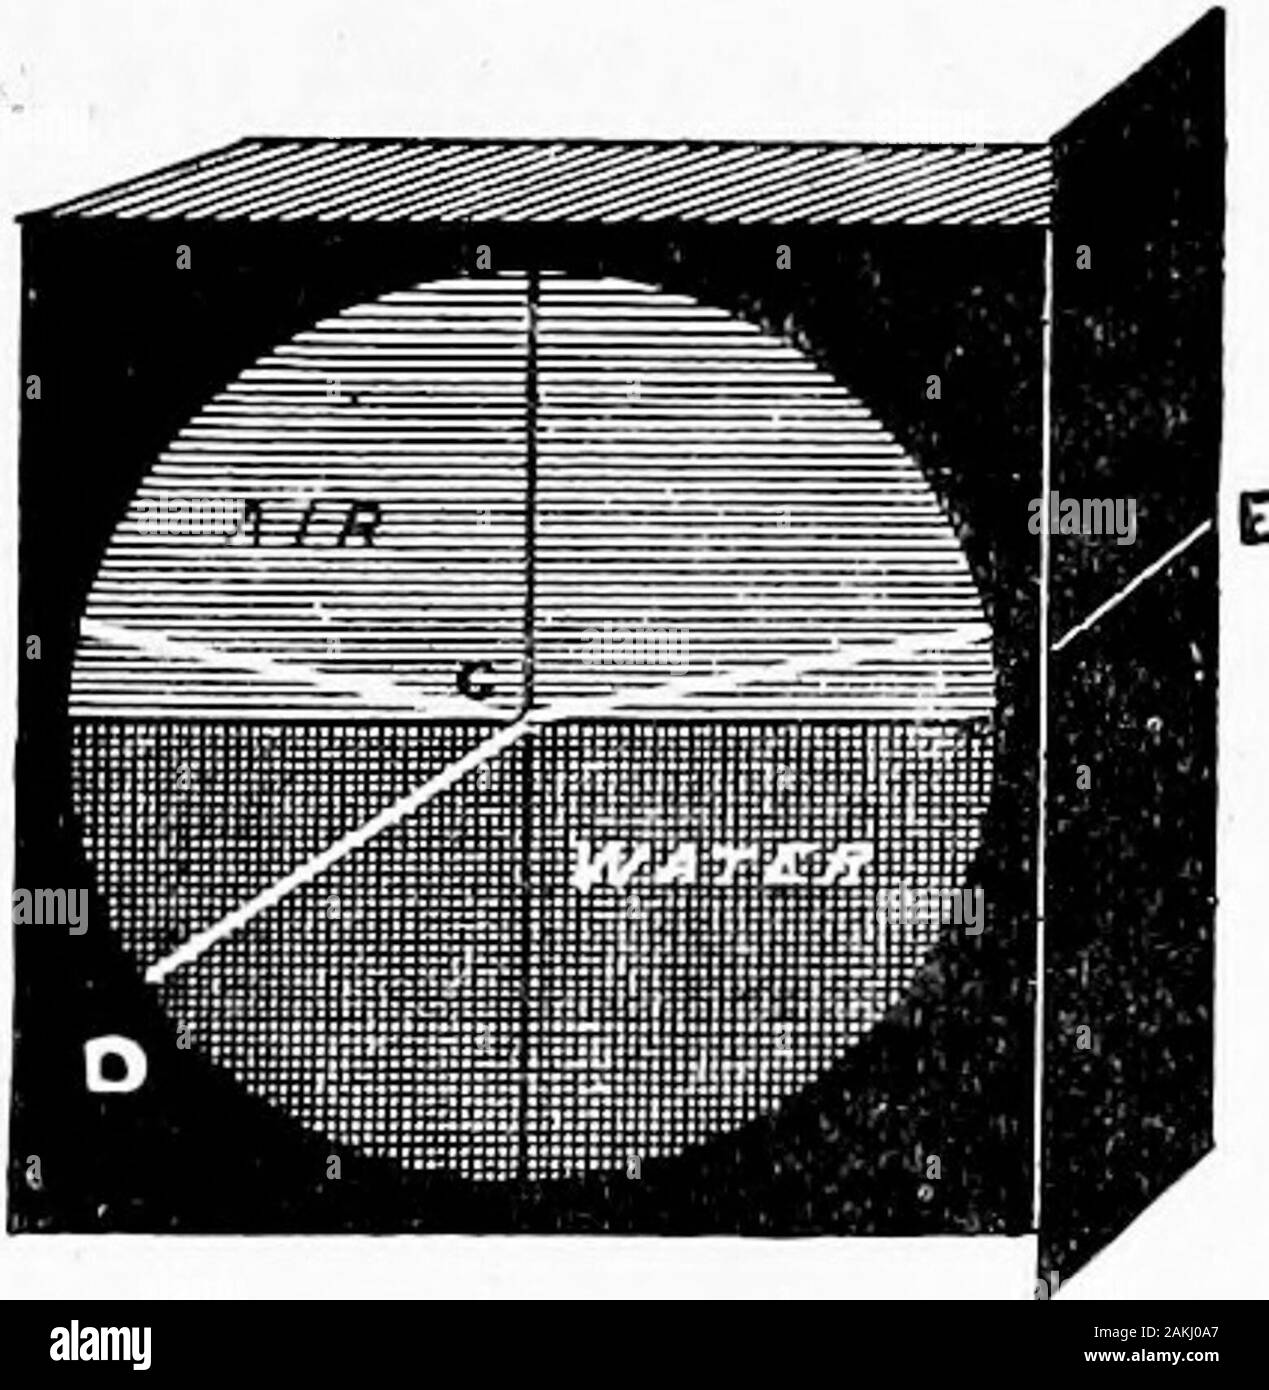 Light; a course of experimental optics, chiefly with the lantern . 37. Gently canting ourlantern a little, we pass the beam direct through the slit e(Fig. 37), so as to enter the water almost horizontally. Wefind the ray bent down a great deal, about at an angle of45°, as shown by the thin white line c d. Now we haveascertained that if we throw the ray first by our reflector 54 LIGHT. [CHApi. up through the water, in this case the path is exactly re-versed. It occurs to us at once, that if we sent our beam at a slightly greater angle (neverforget that all angles measurefrom the normal) through Stock Photo